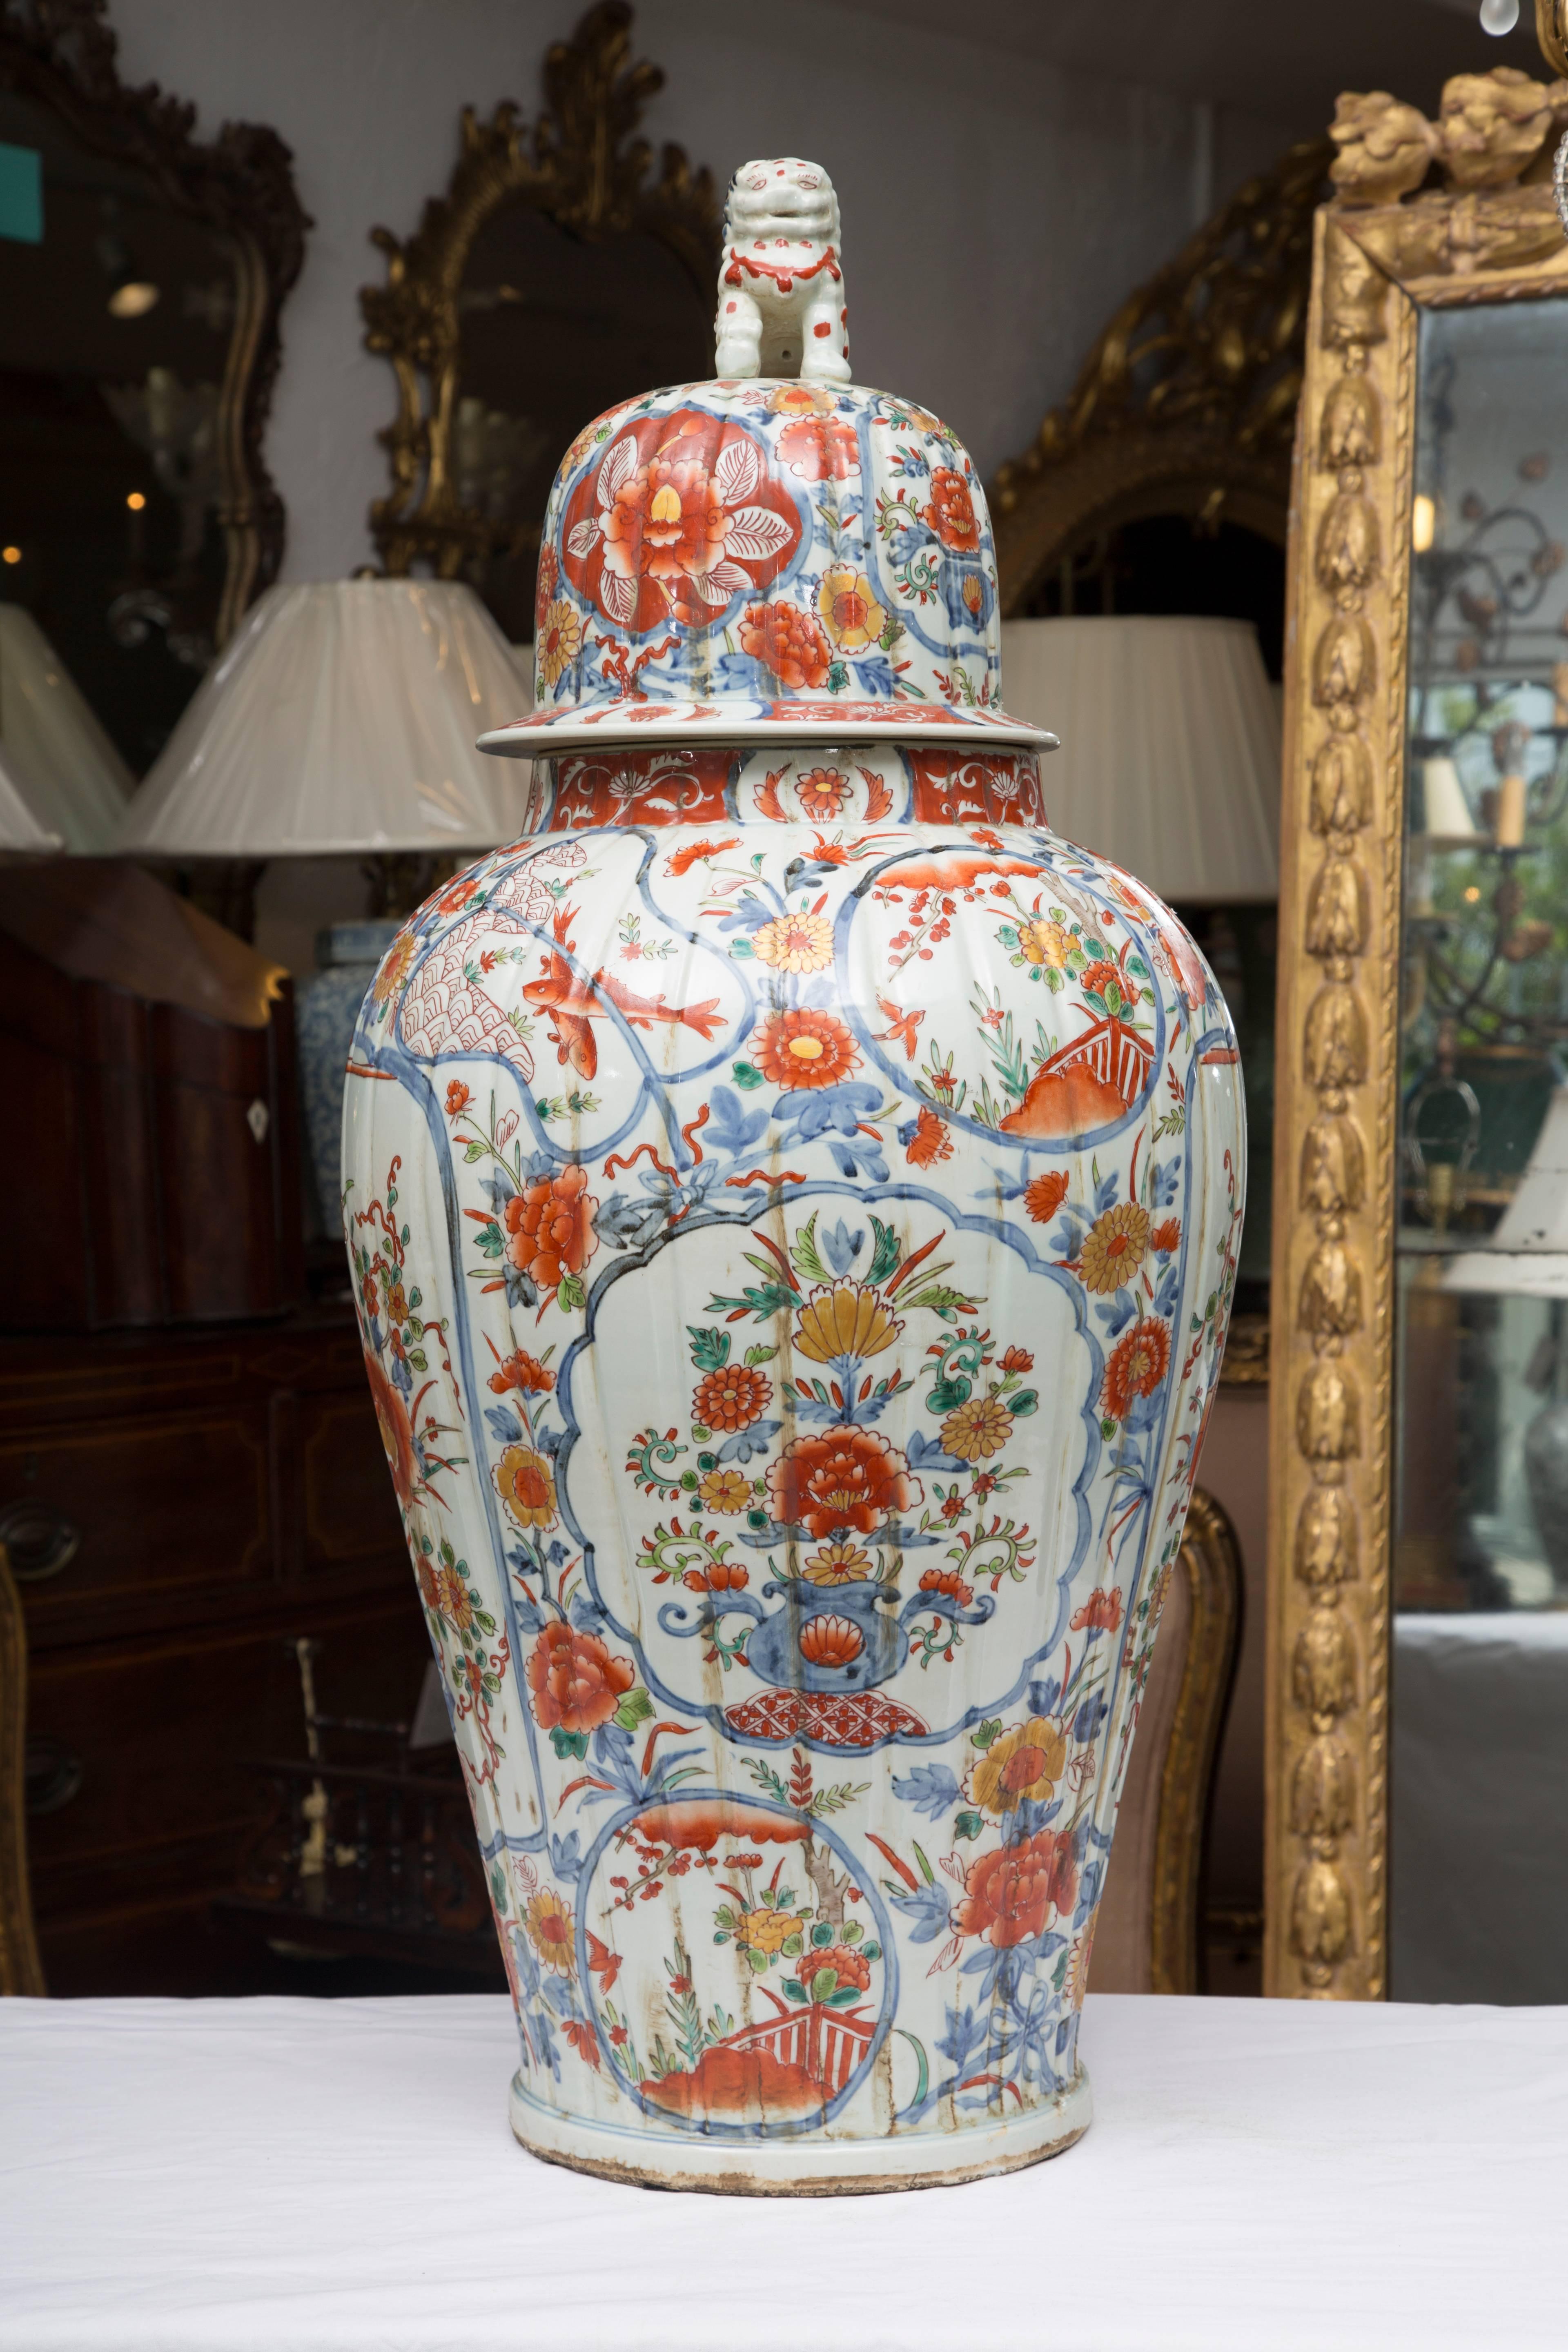 These magnificent Chinese palace lidded urns offer a soft palette of blues and bittersweet floral sprays and other naturalistic decoration. The design incorporates floral sprays within various medallion shapes . The urns are flutted and lidded with